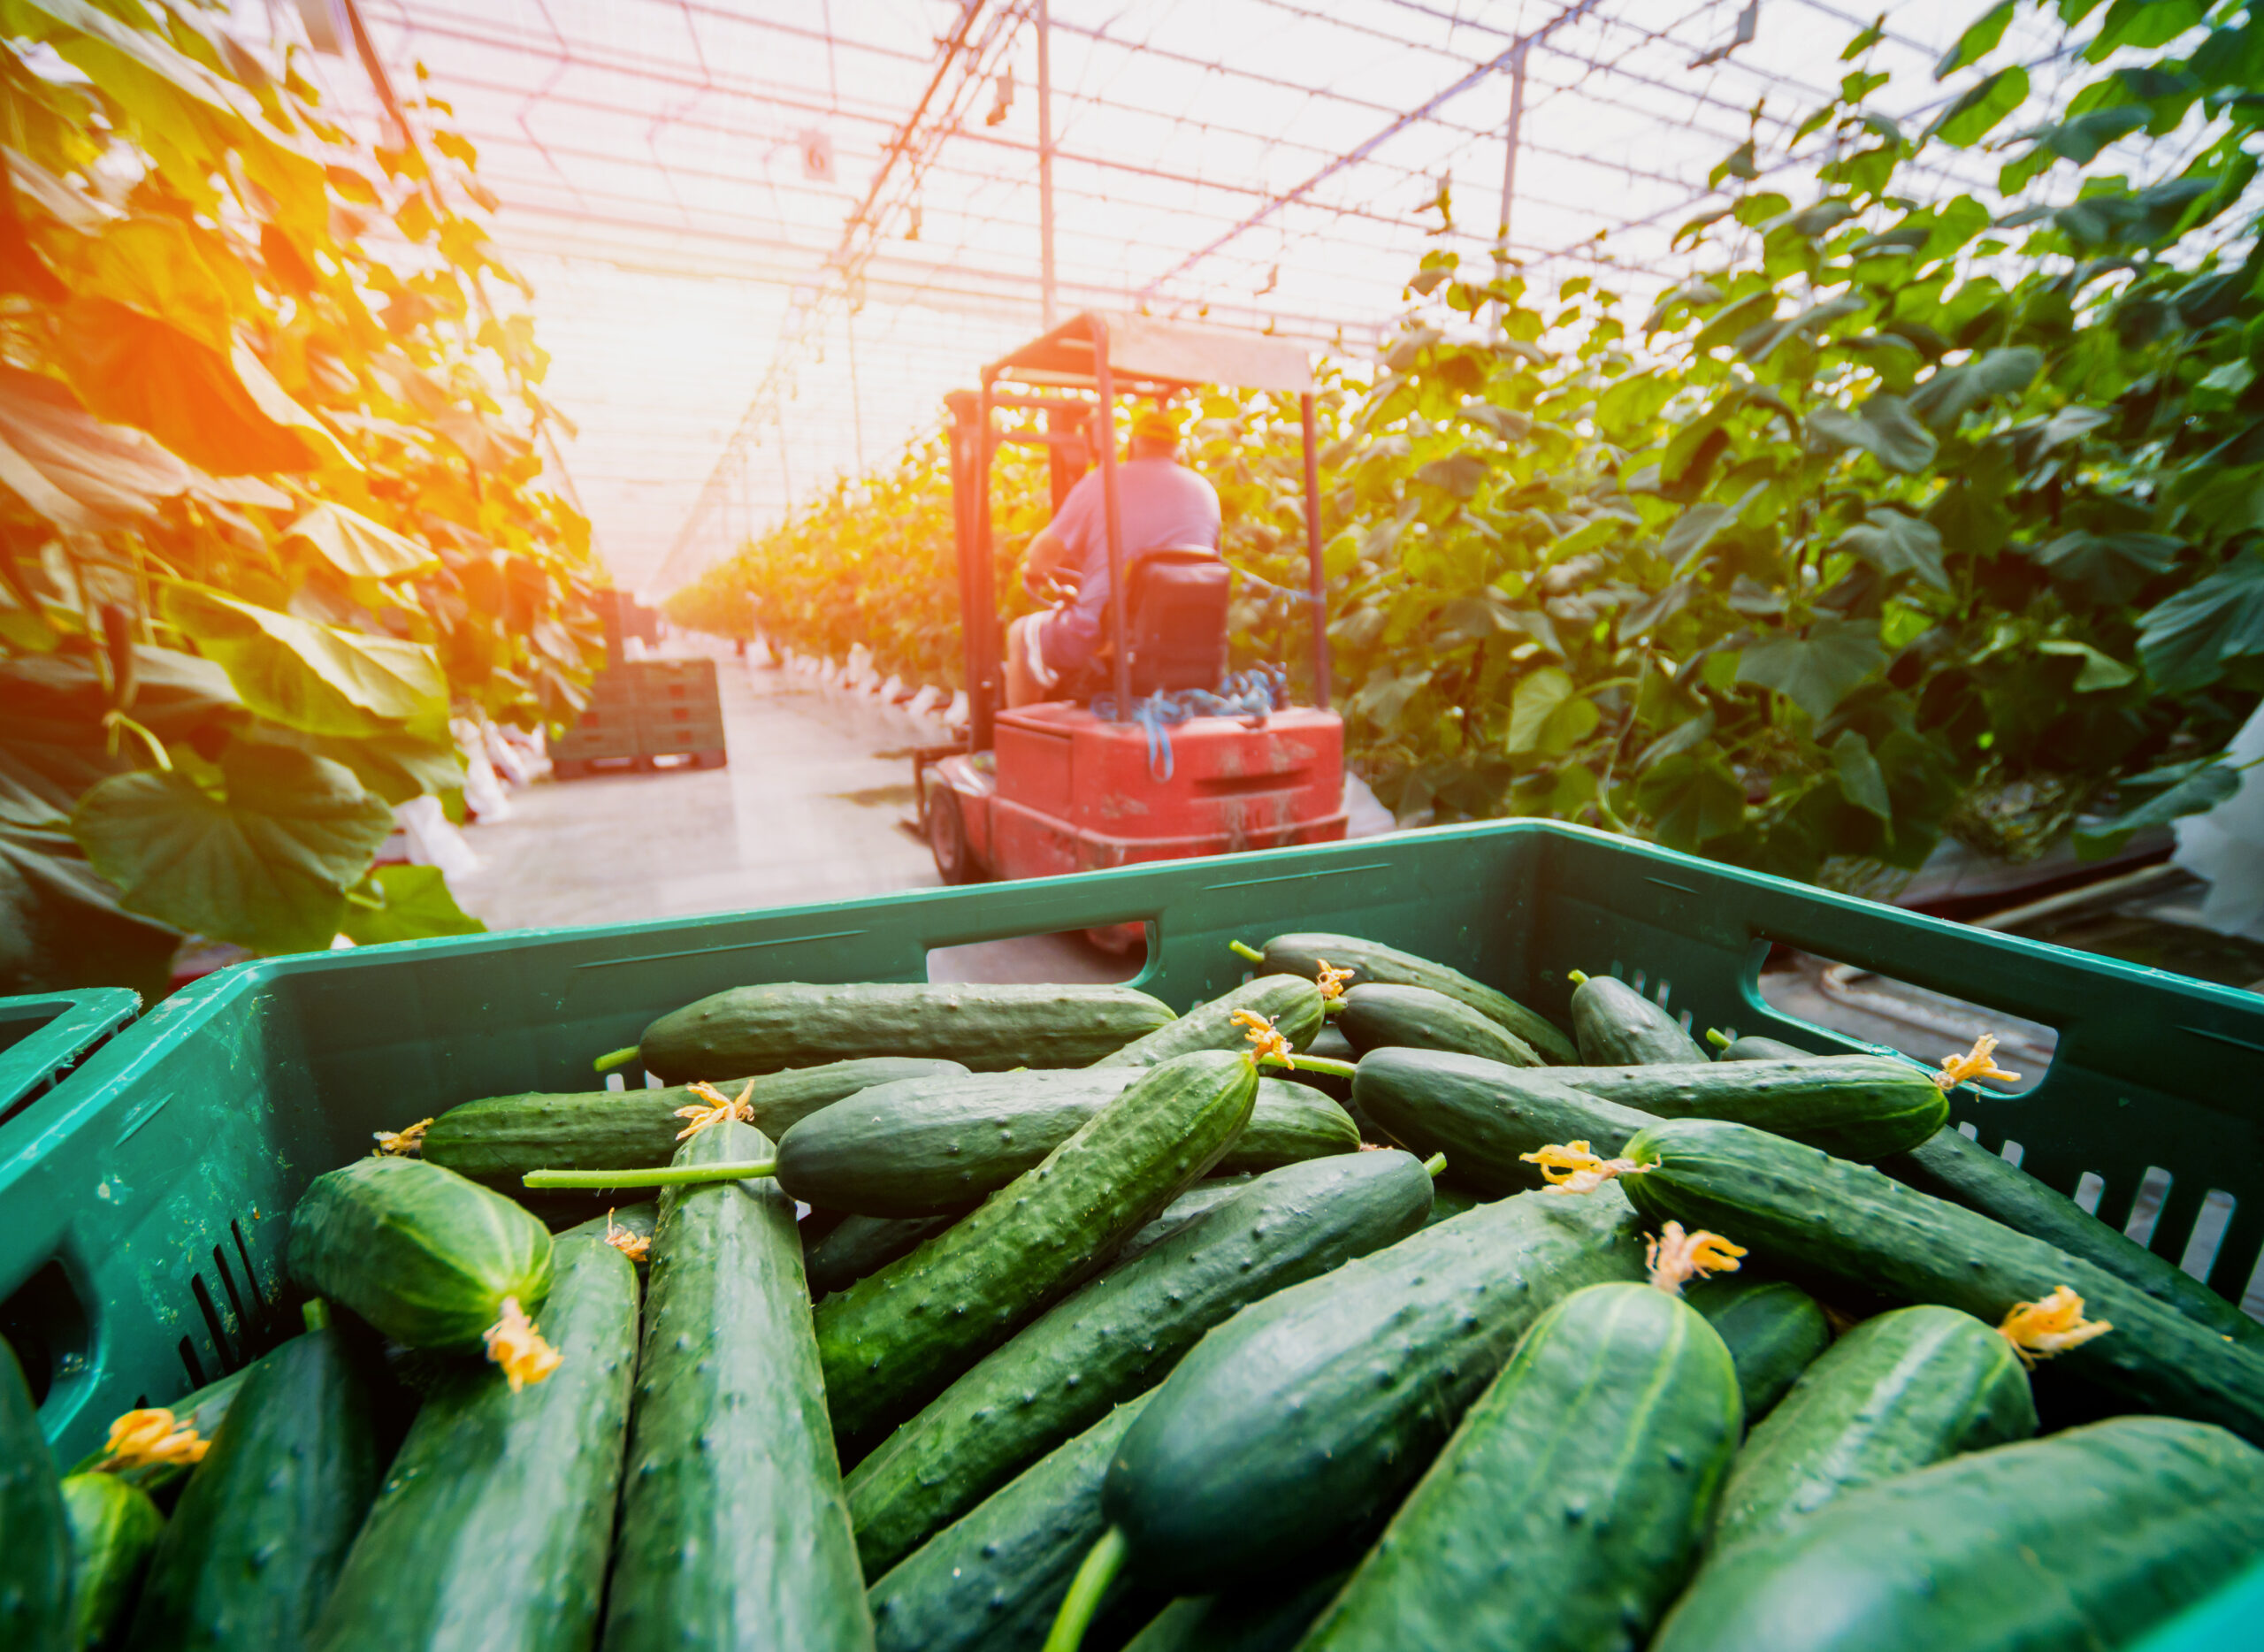 Harvested Cucumbers in a sunset greenhouse